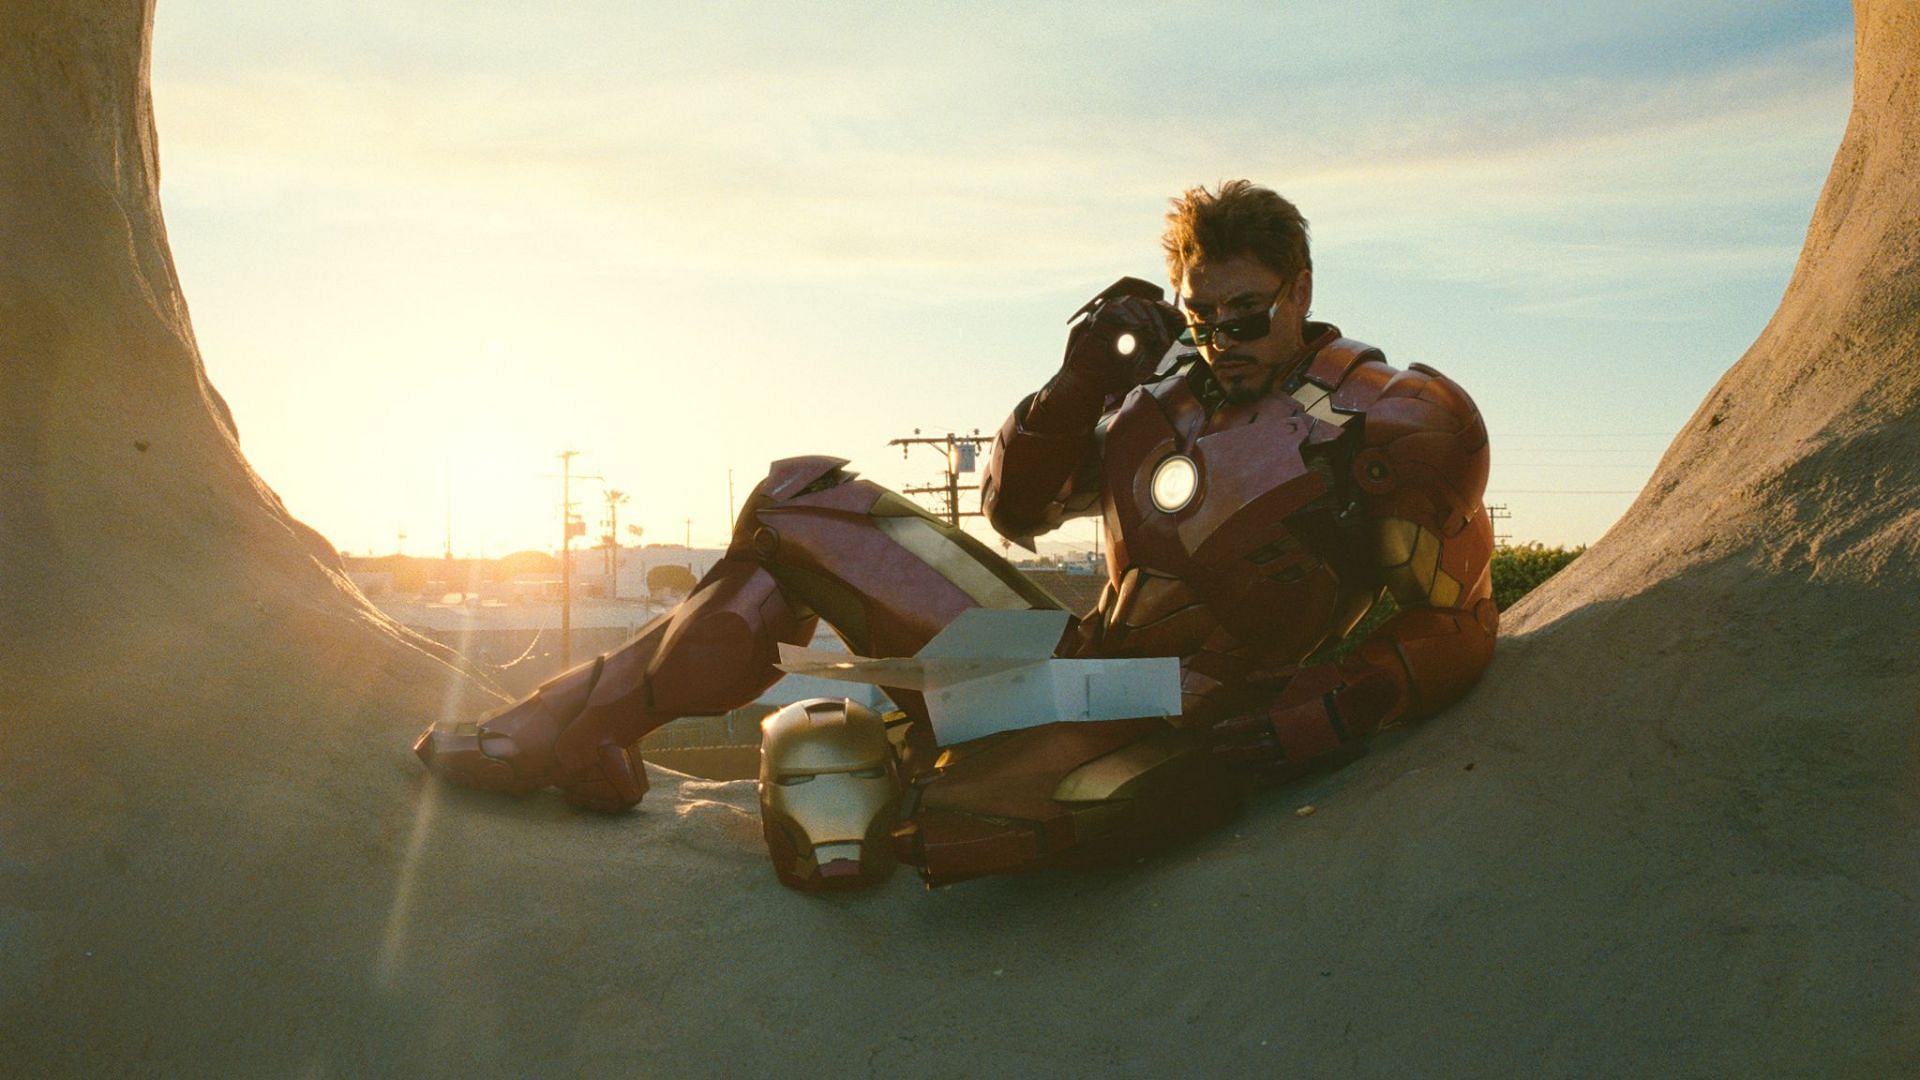 Tony Stark, also known as Iron Man, is one of the popular superheroes, but his reliance on technology and wealth to maintain his status as a hero may be considered overrated (Image via Marvel Studios)